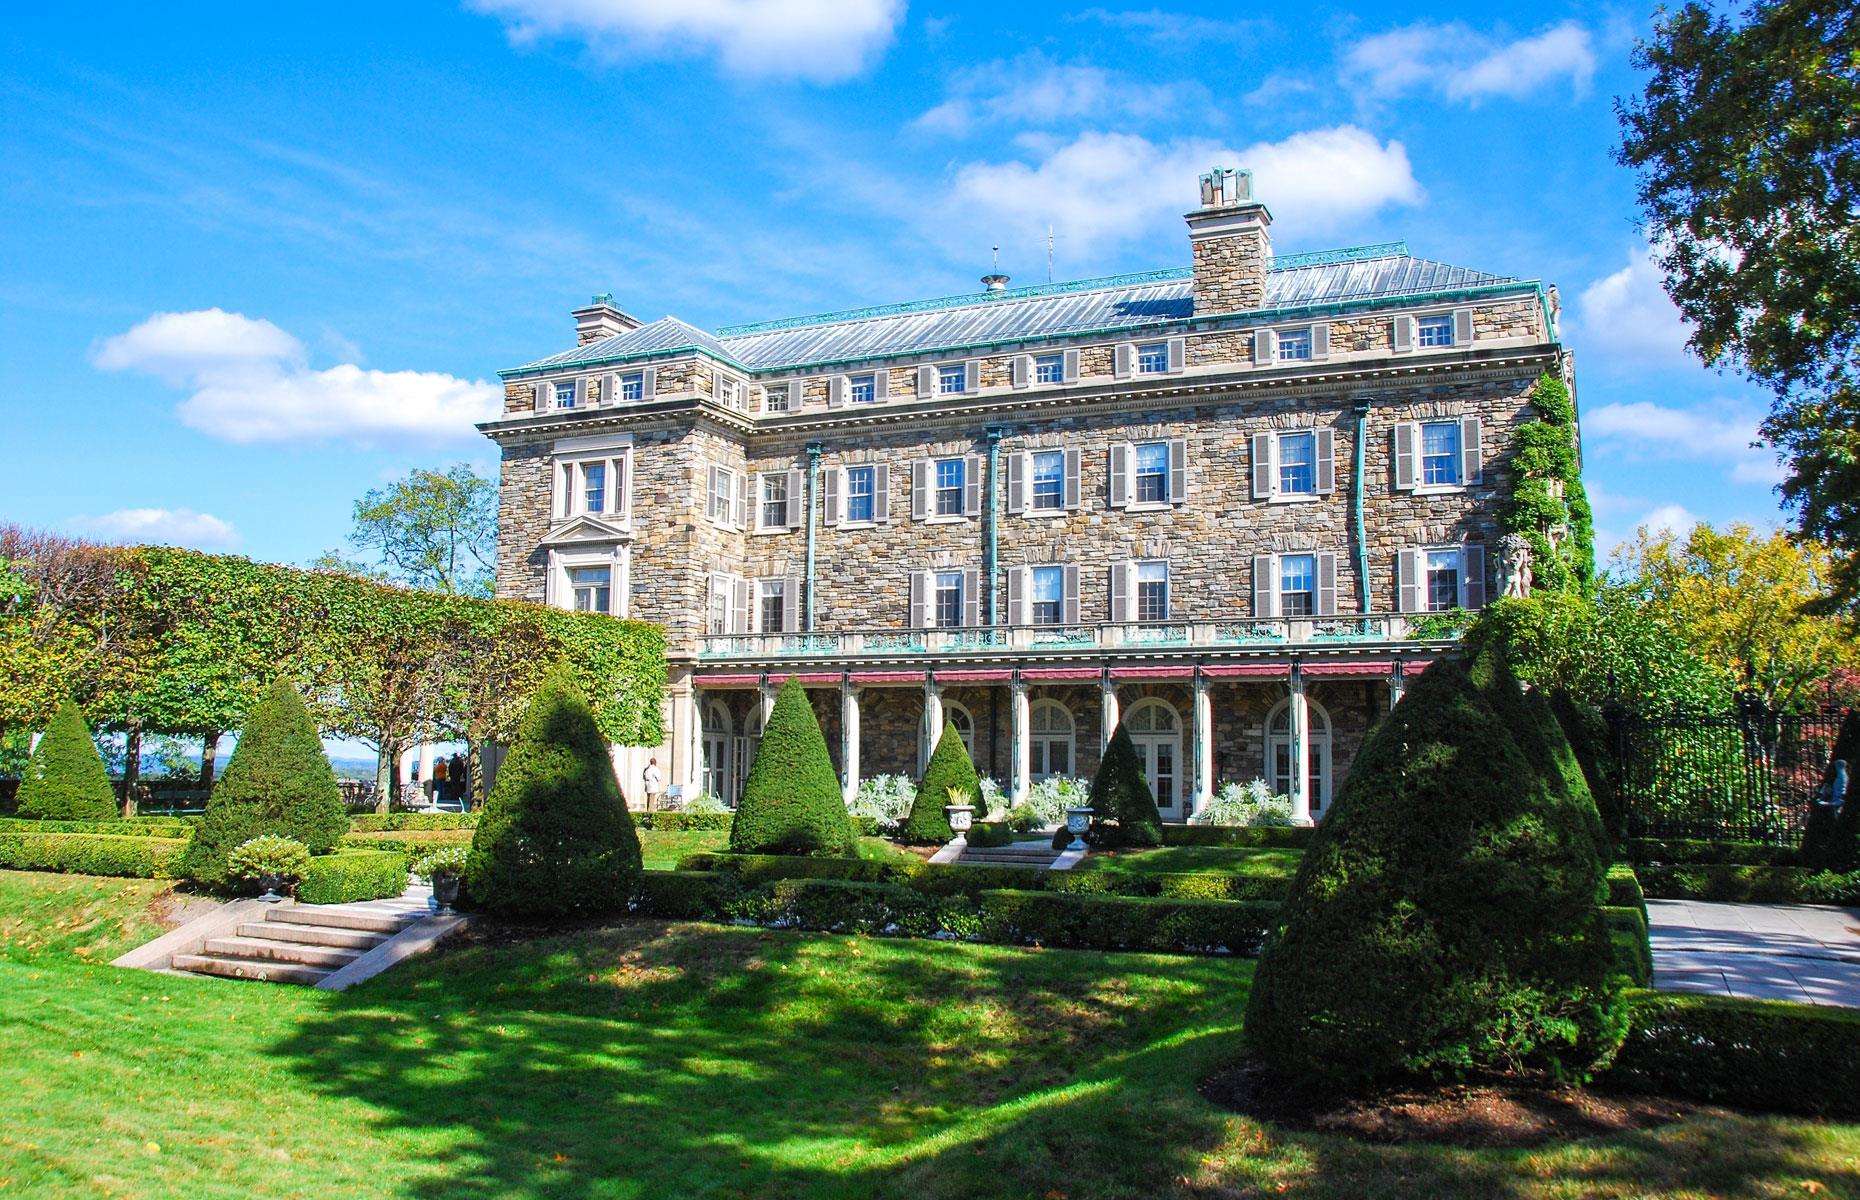 <p>In 1893, Rockefeller purchased land in the Pocantico Hills of New York, near to his brother’s estate, and commissioned the construction of a massive mansion which would overlook the Hudson River. Kykuit, as the home came to be known, was originally designed to be a steep-roofed, three-storey structure.</p>  <p>However, the final product was redesigned by celebrated architect William Welles Bosworth to be an imposing six-storey stone Georgian Revival structure, as can be seen here.</p>